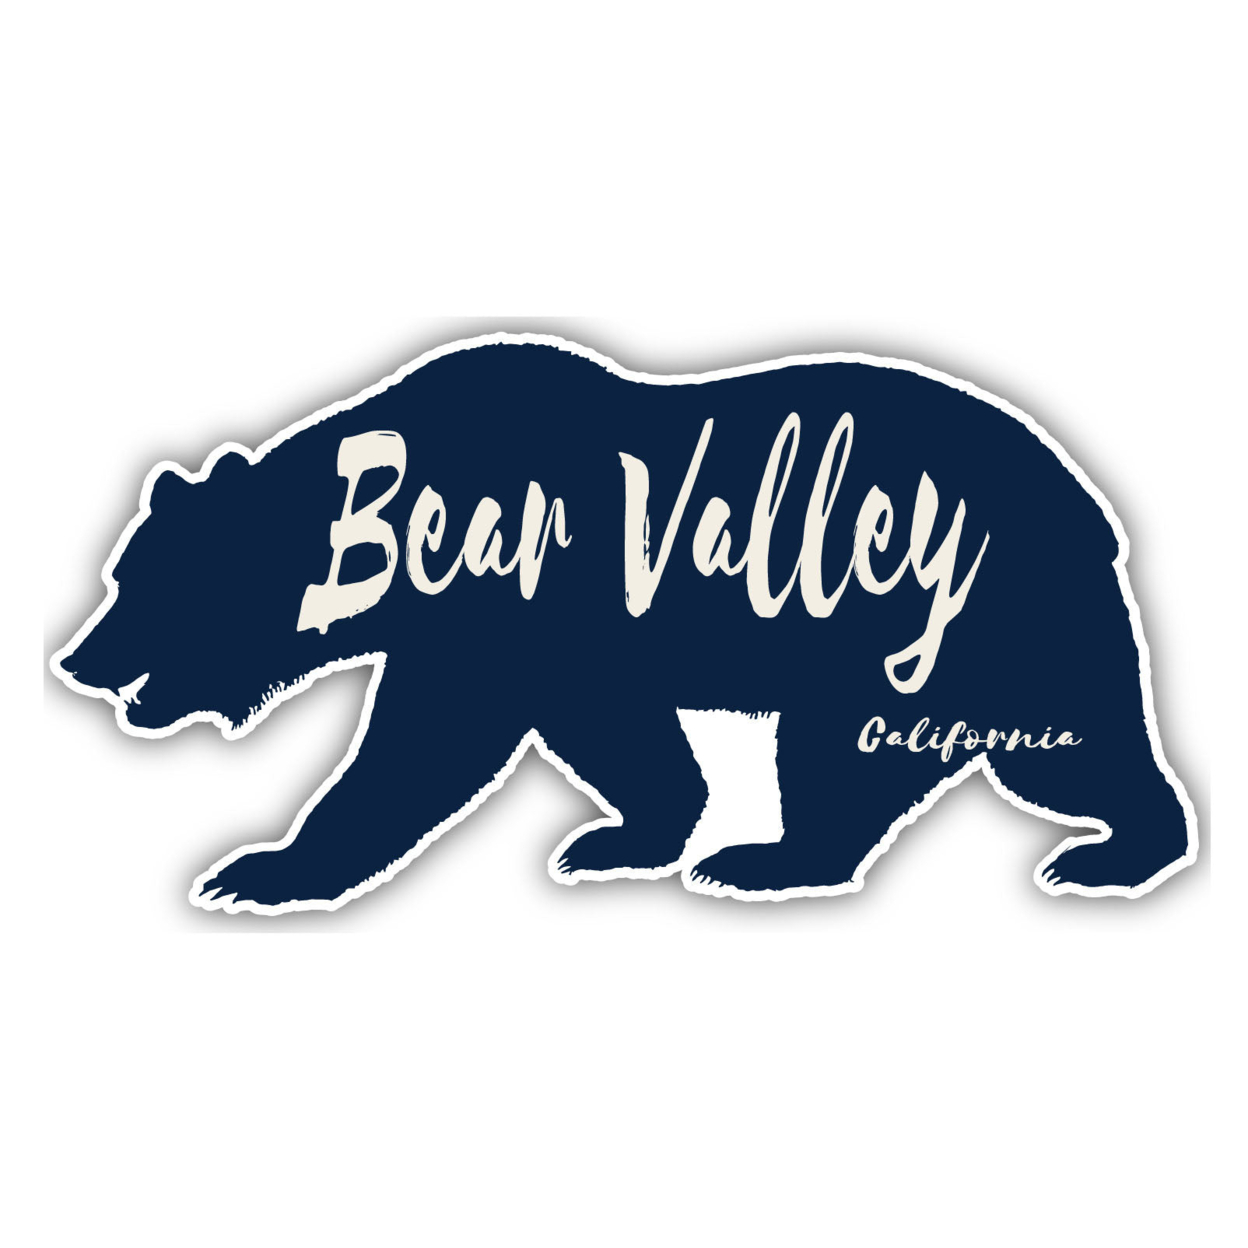 Bear Valley California Souvenir Decorative Stickers (Choose Theme And Size) - 4-Pack, 6-Inch, Bear